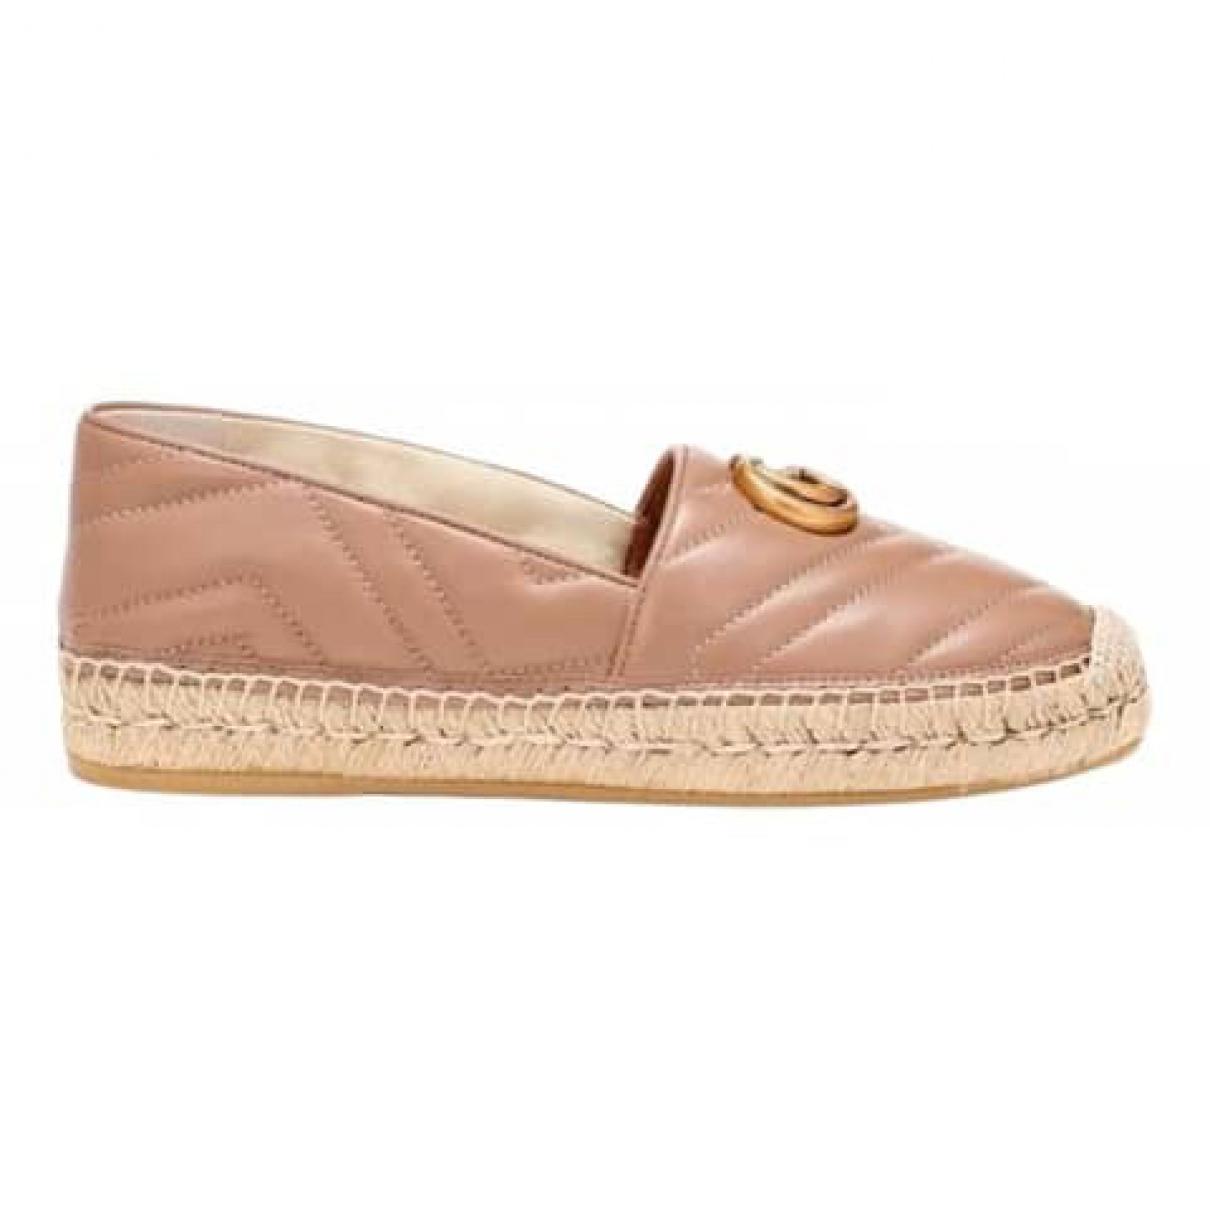 Marmont leather flats - 3